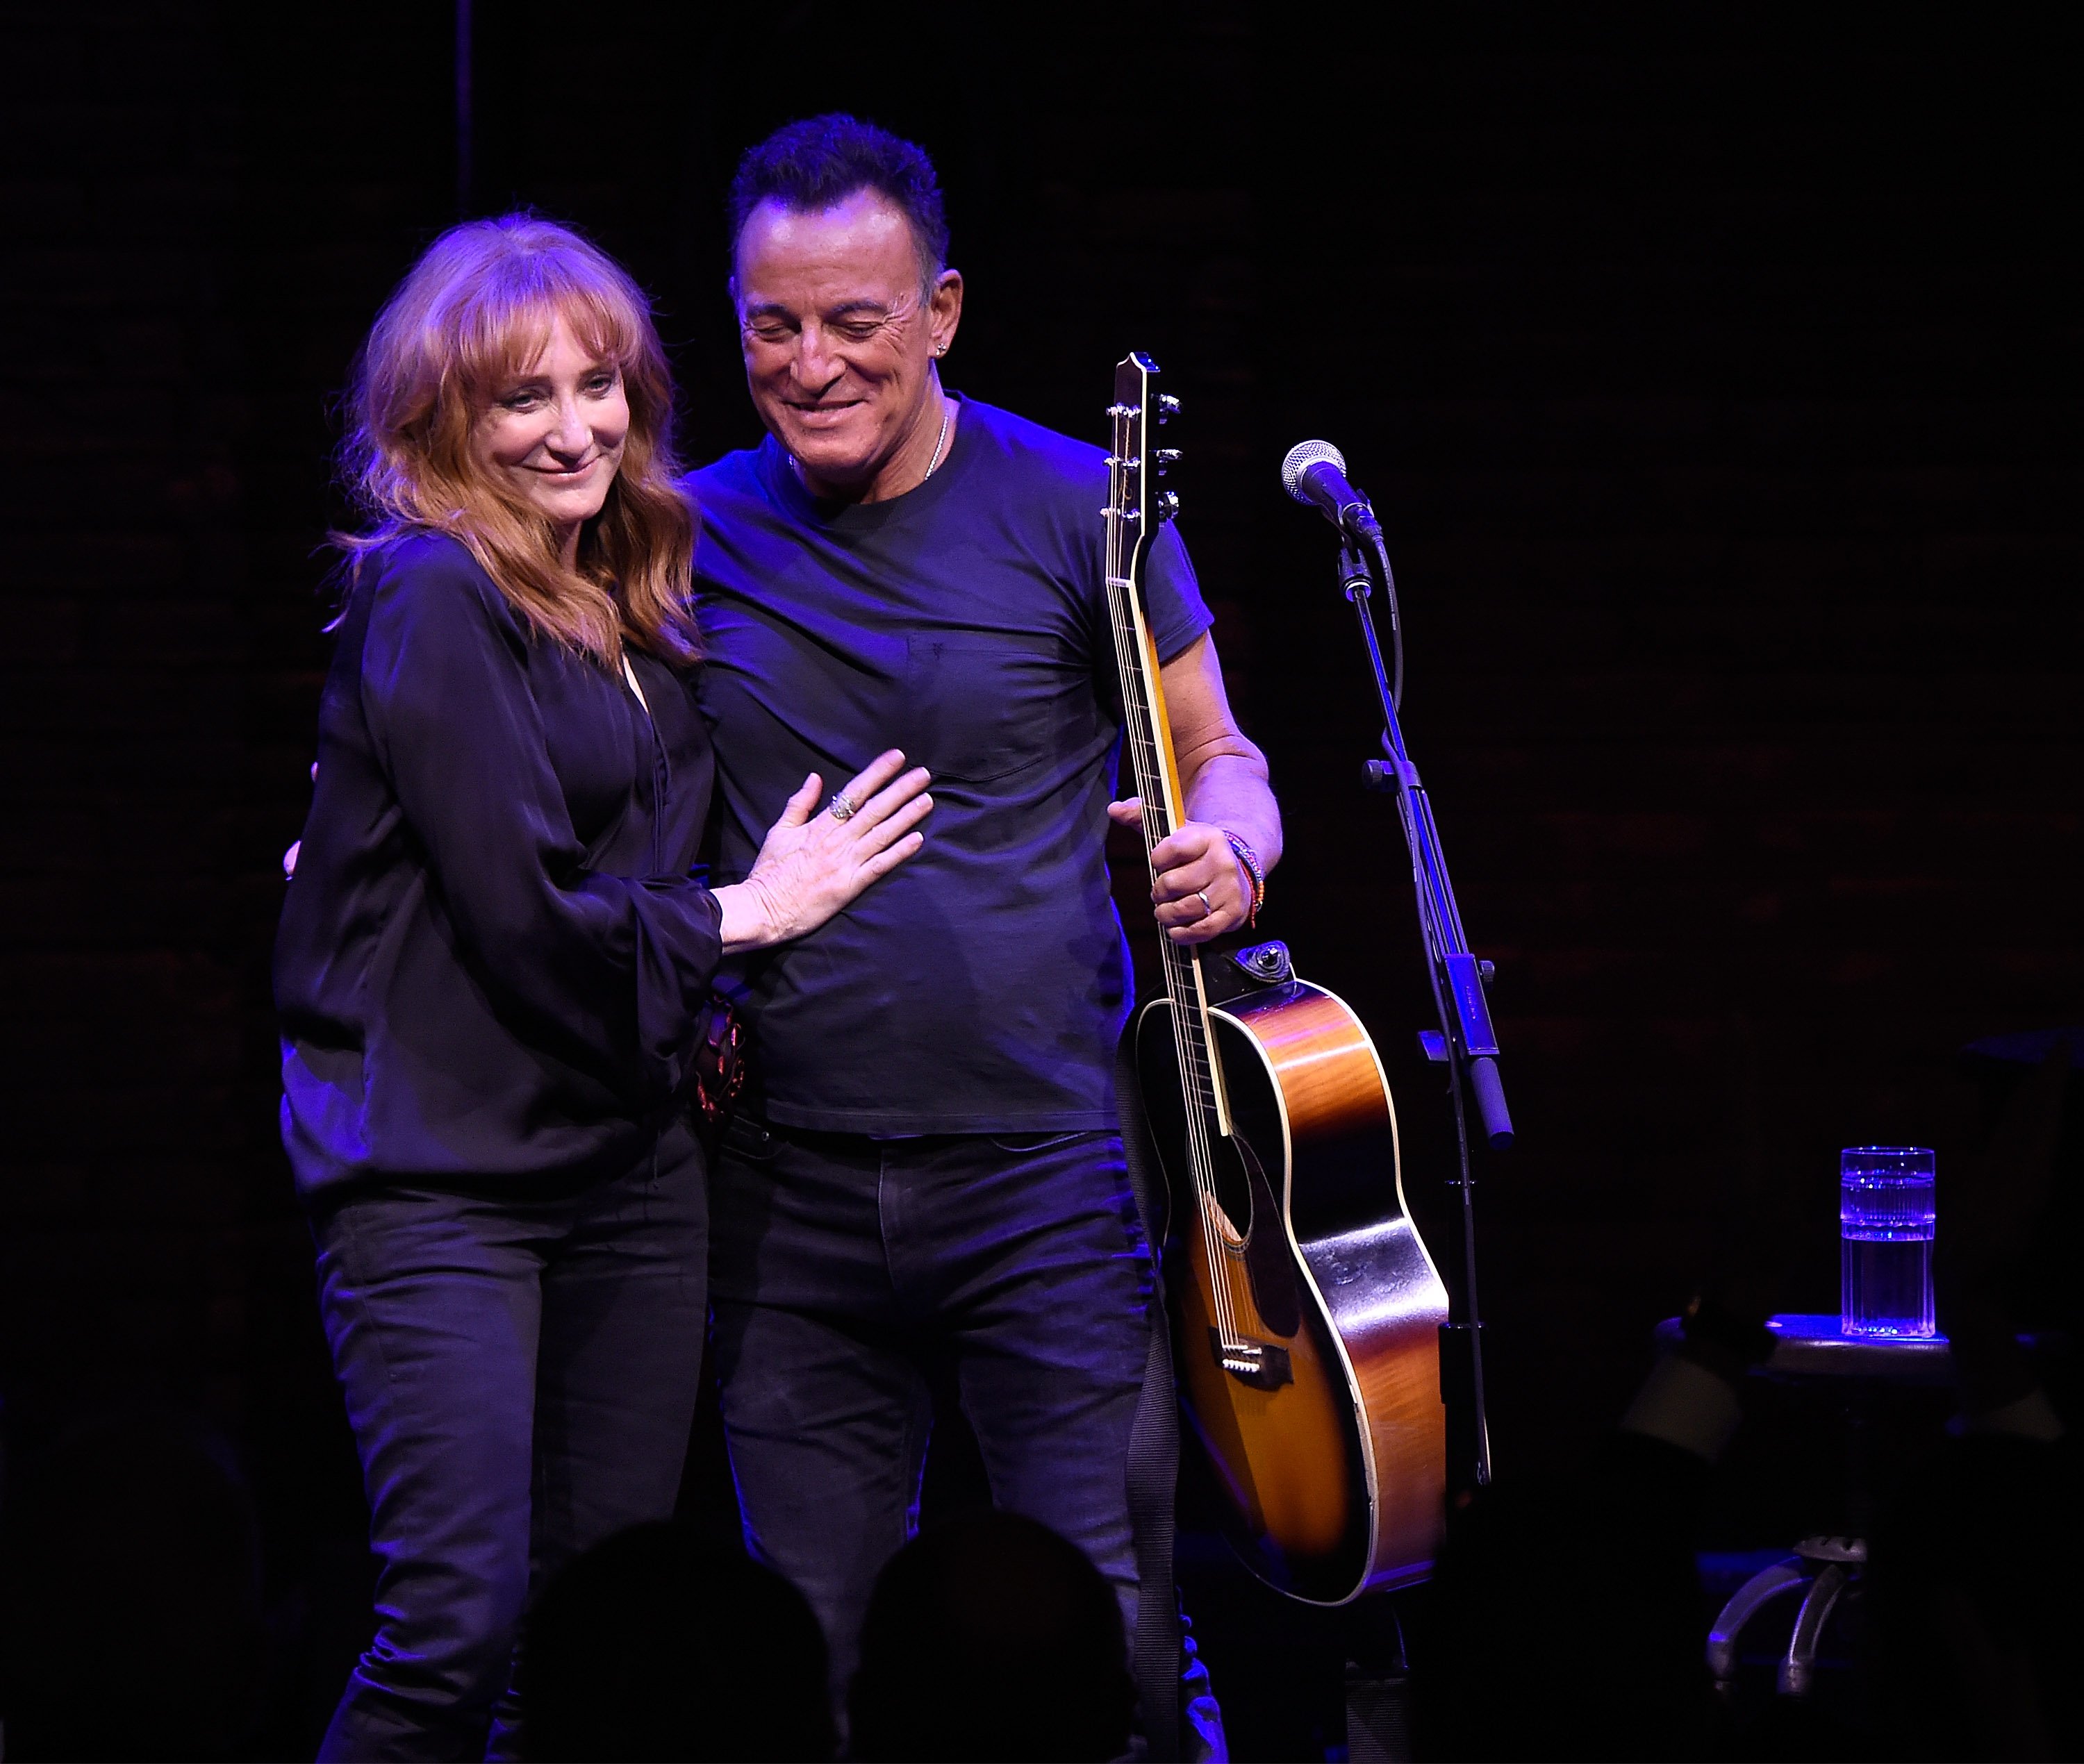 Patti Scialfa and Bruce Springsteen onstage during "Springsteen On Broadway" at Walter Kerr Theatre on October 12, 2017, in New York City. | Source: Getty Images.